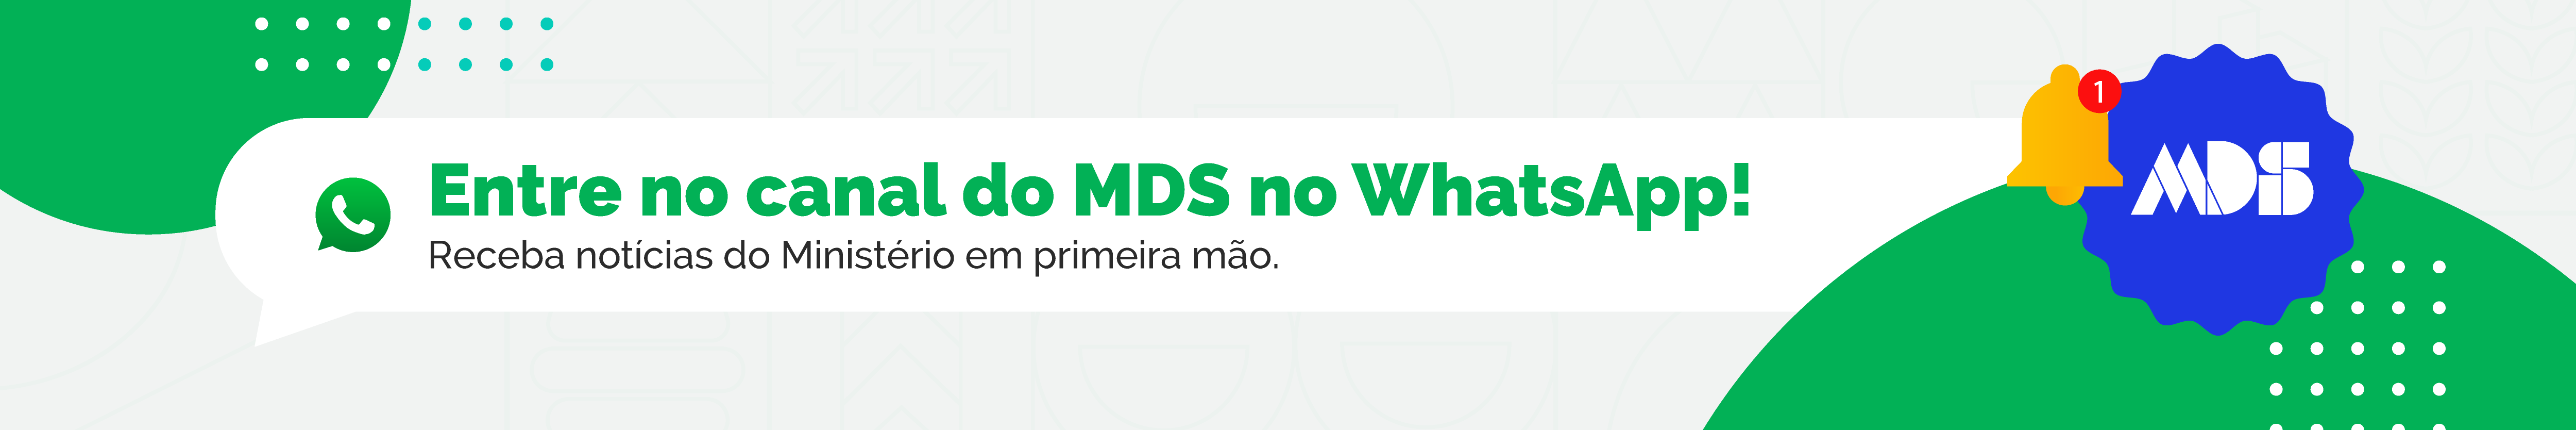 Banner_whatsapp MDS.png